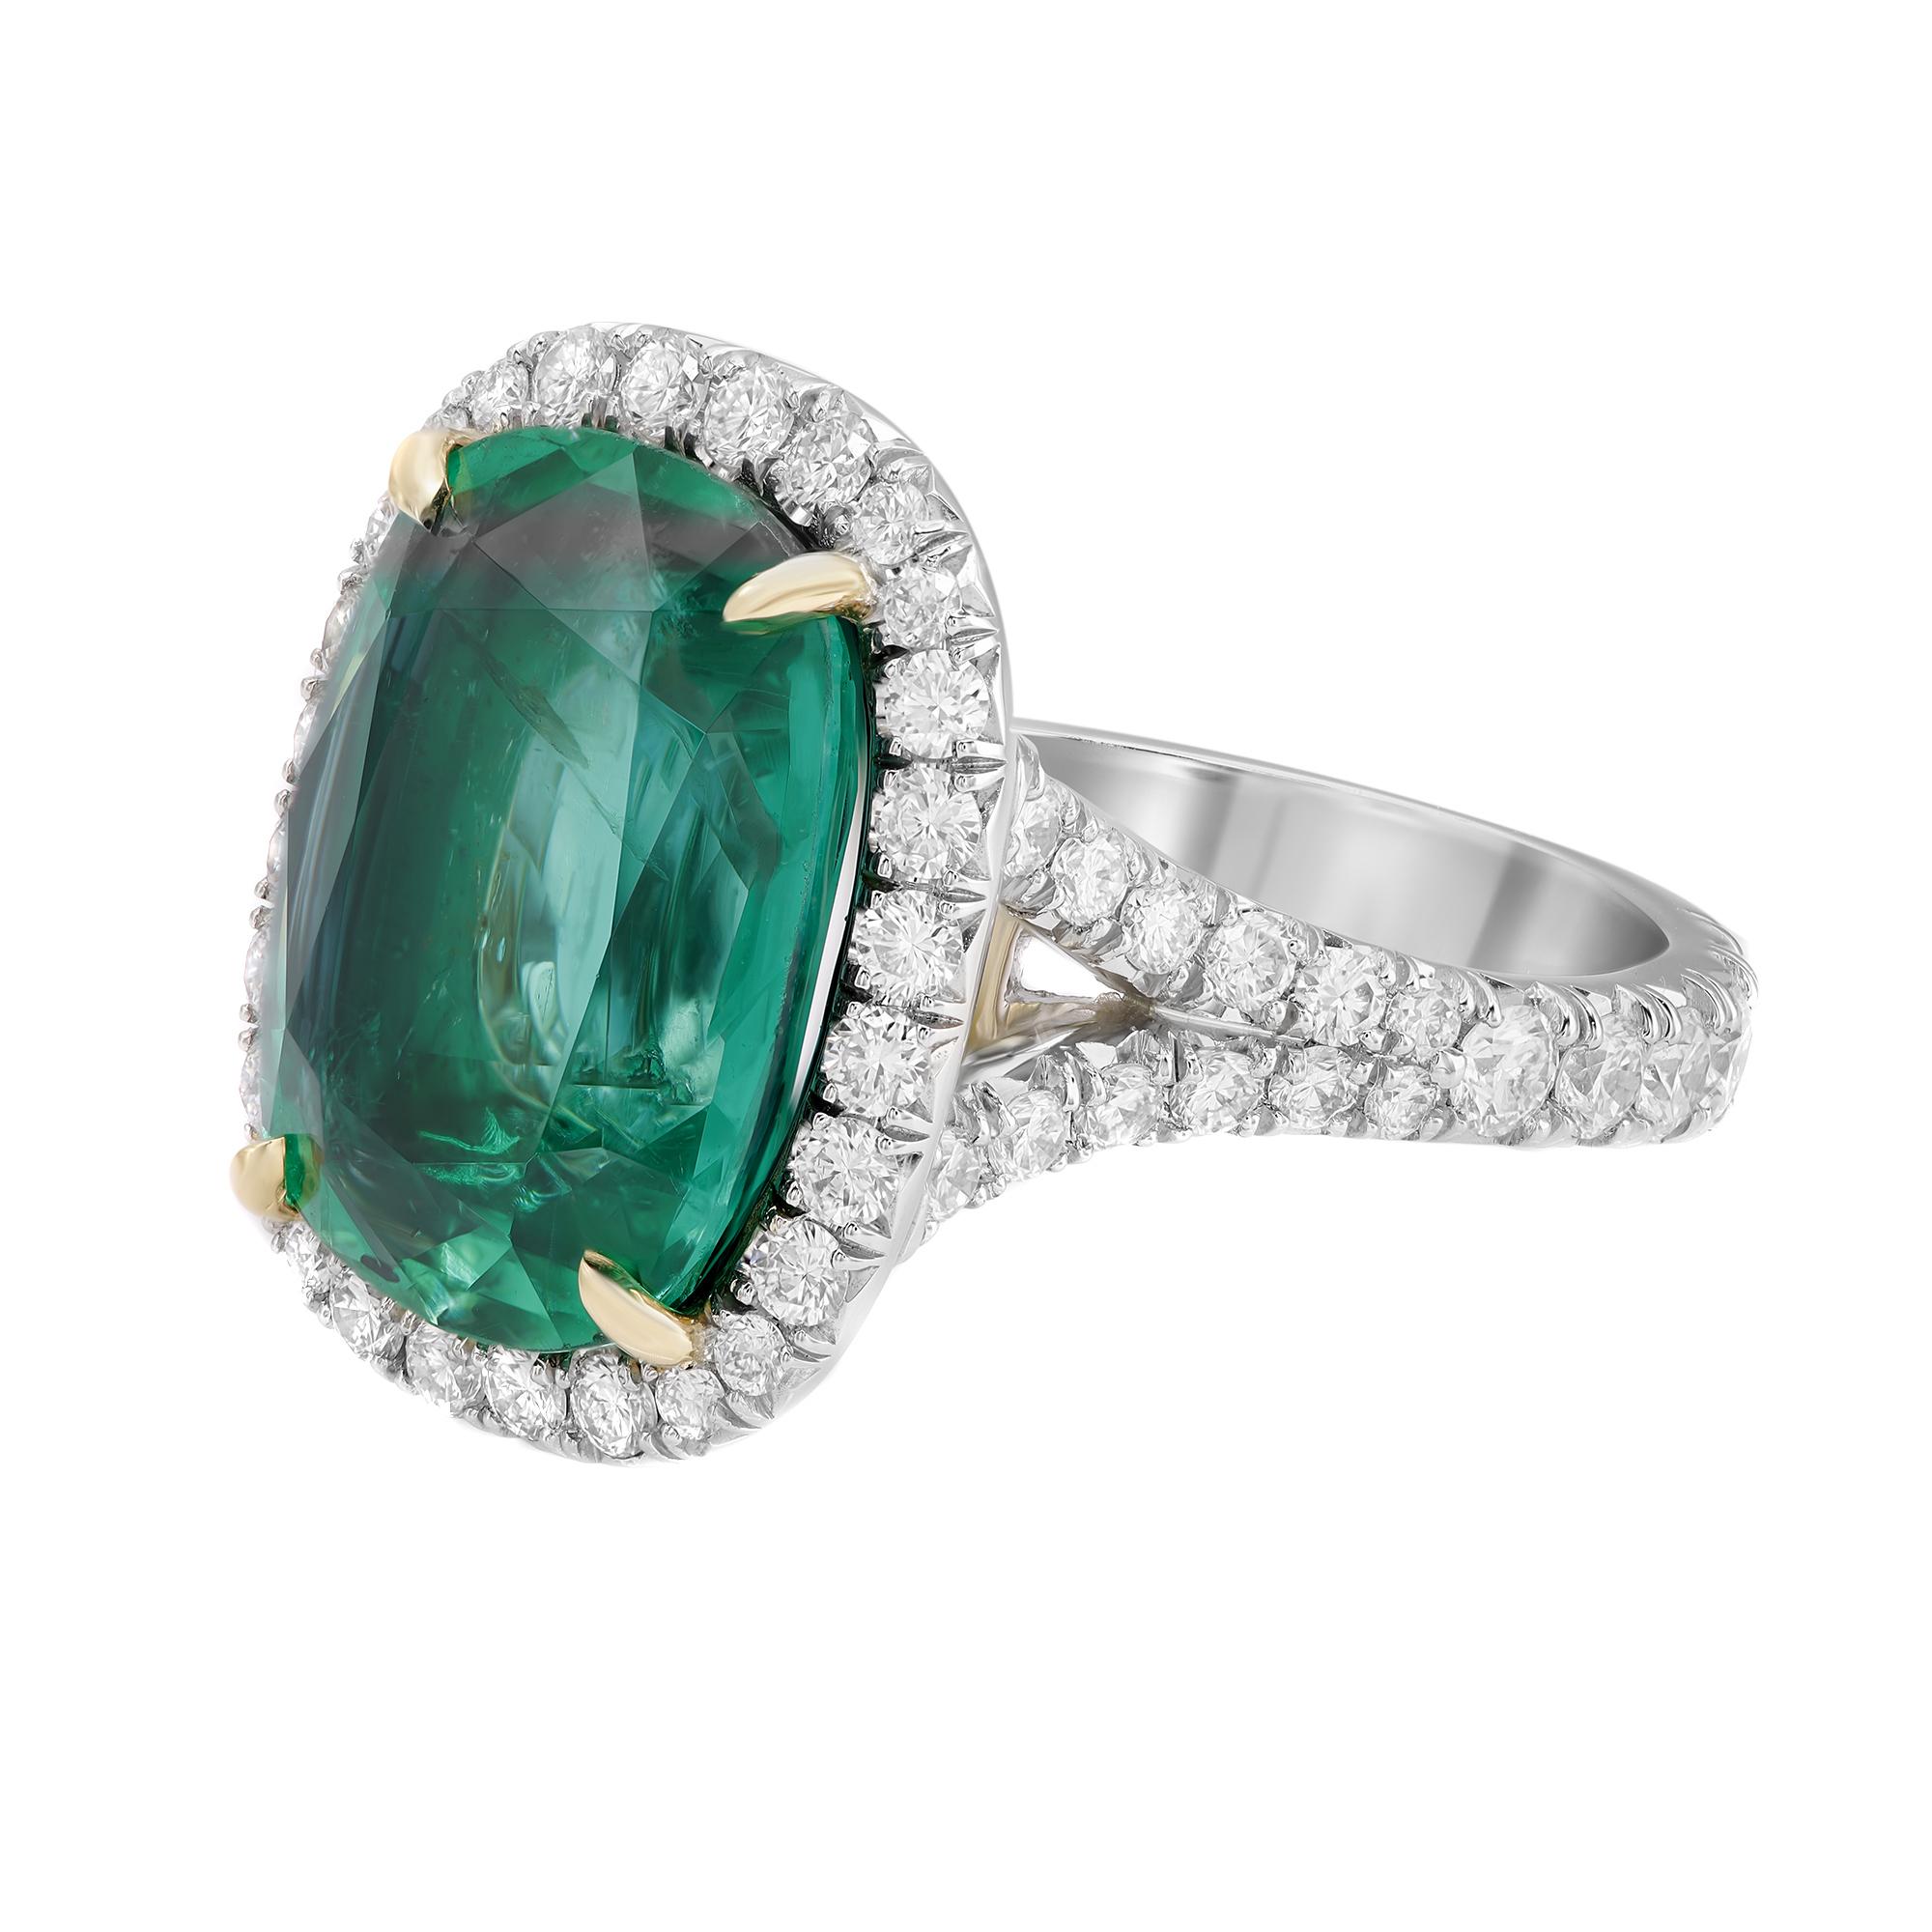 Wrap your finger with this extraordinary ring showcasing a prong set GIA certified cushion shaped rich green Zambian Emerald weighing 7.30 carats surrounded by a halo of round brilliant cut diamonds set all through the band. Handcrafted to